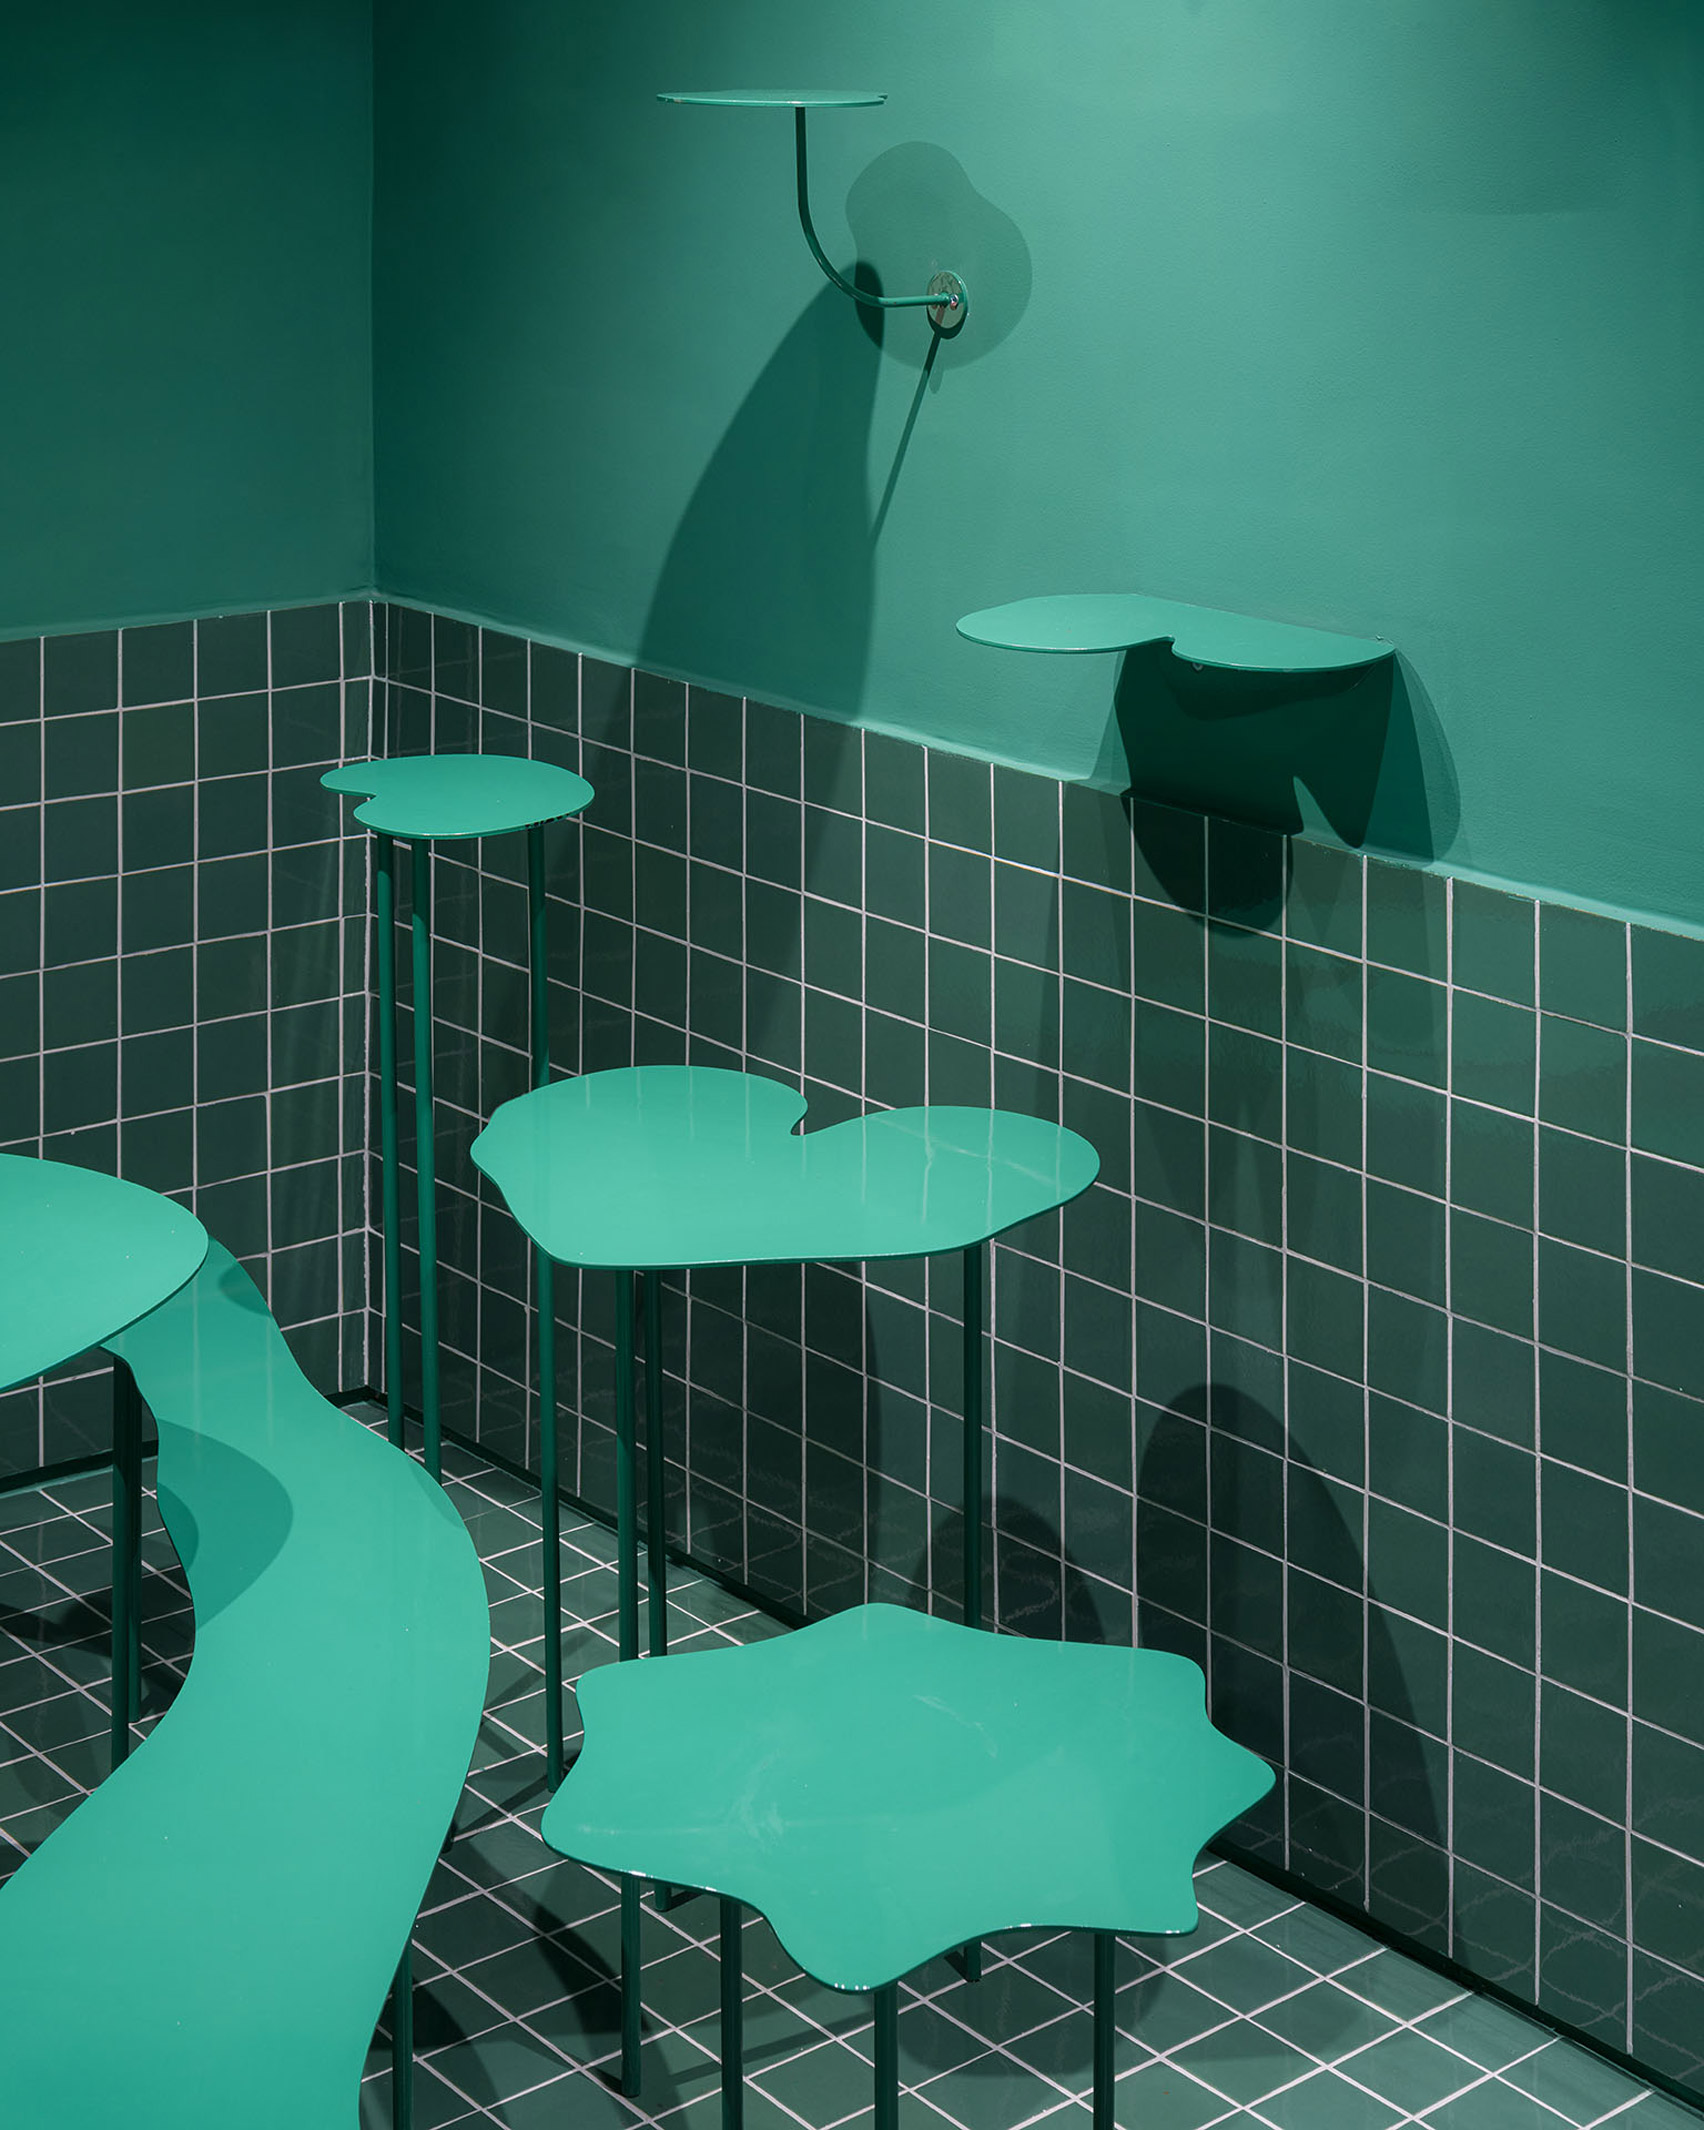 Wiggly edged sea green furniture in colour-block interior of bakery designed by Case Antillón